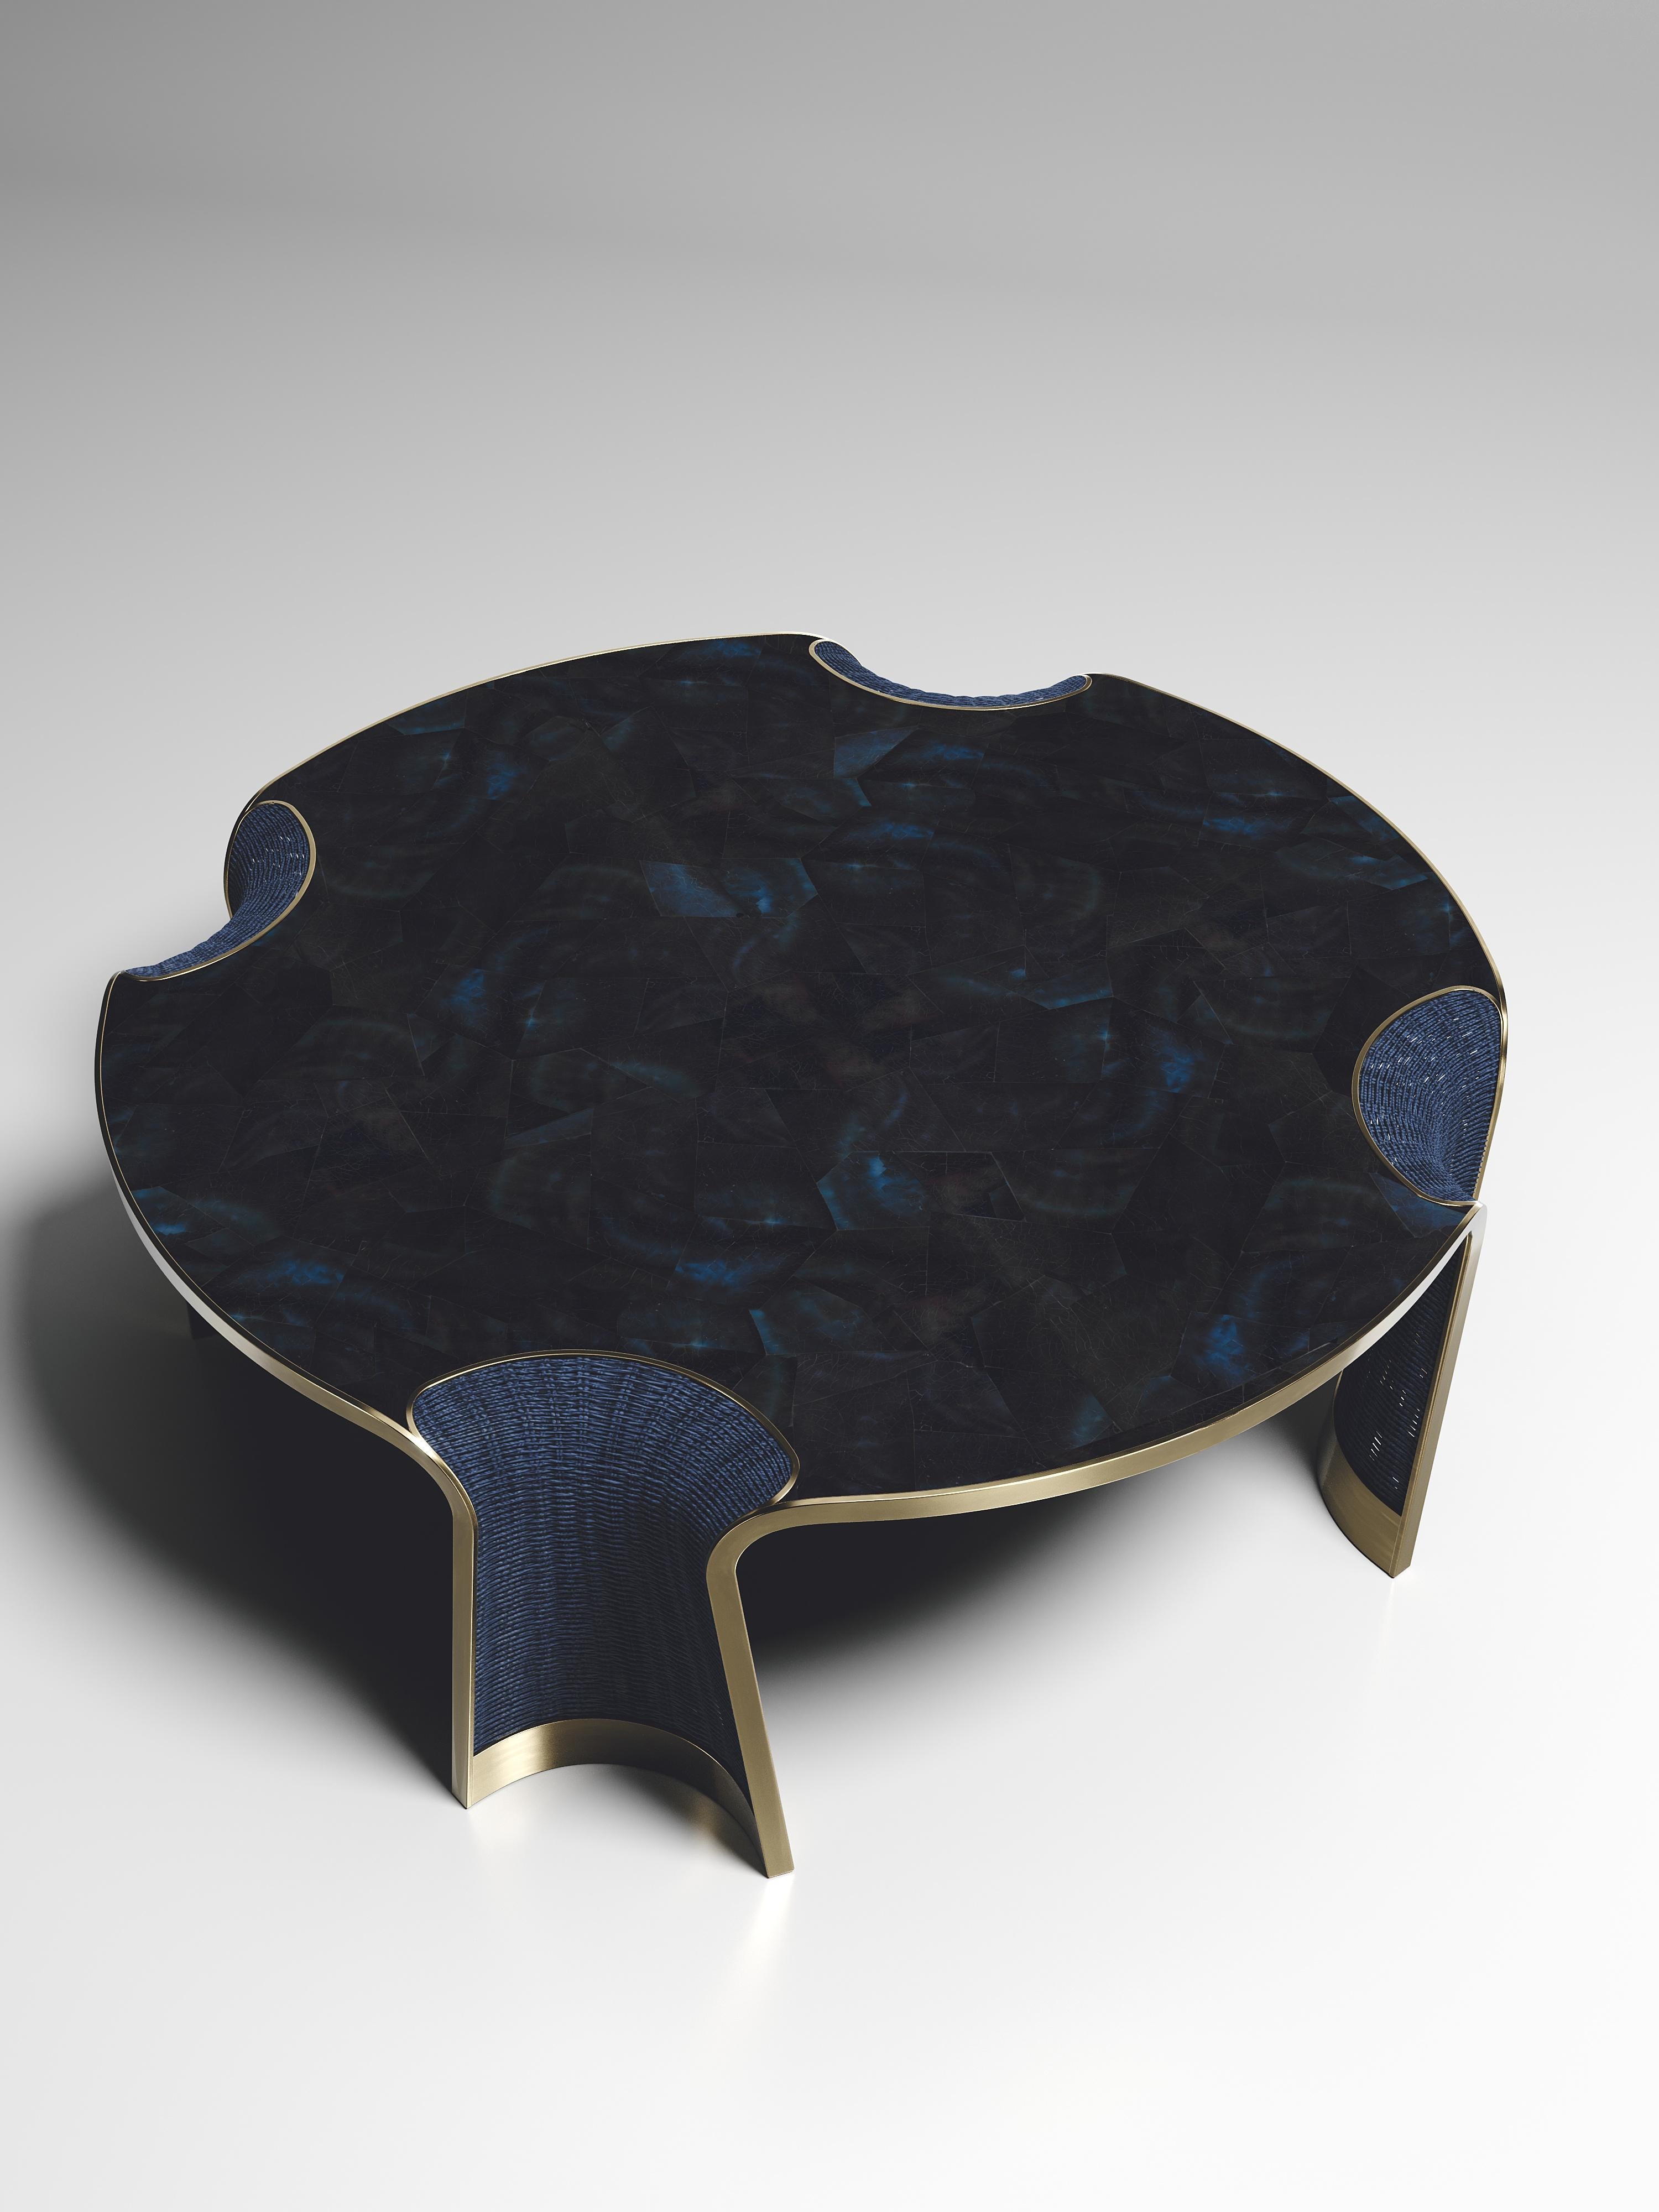 The Nymphea round coffee by R & Y Augousti is a part of their new Rattan capsule launch. The piece explores the brand's iconic DNA of bringing old world artisanal craft into a contemporary and utterly luxury feel. This table is done in a blue rattan